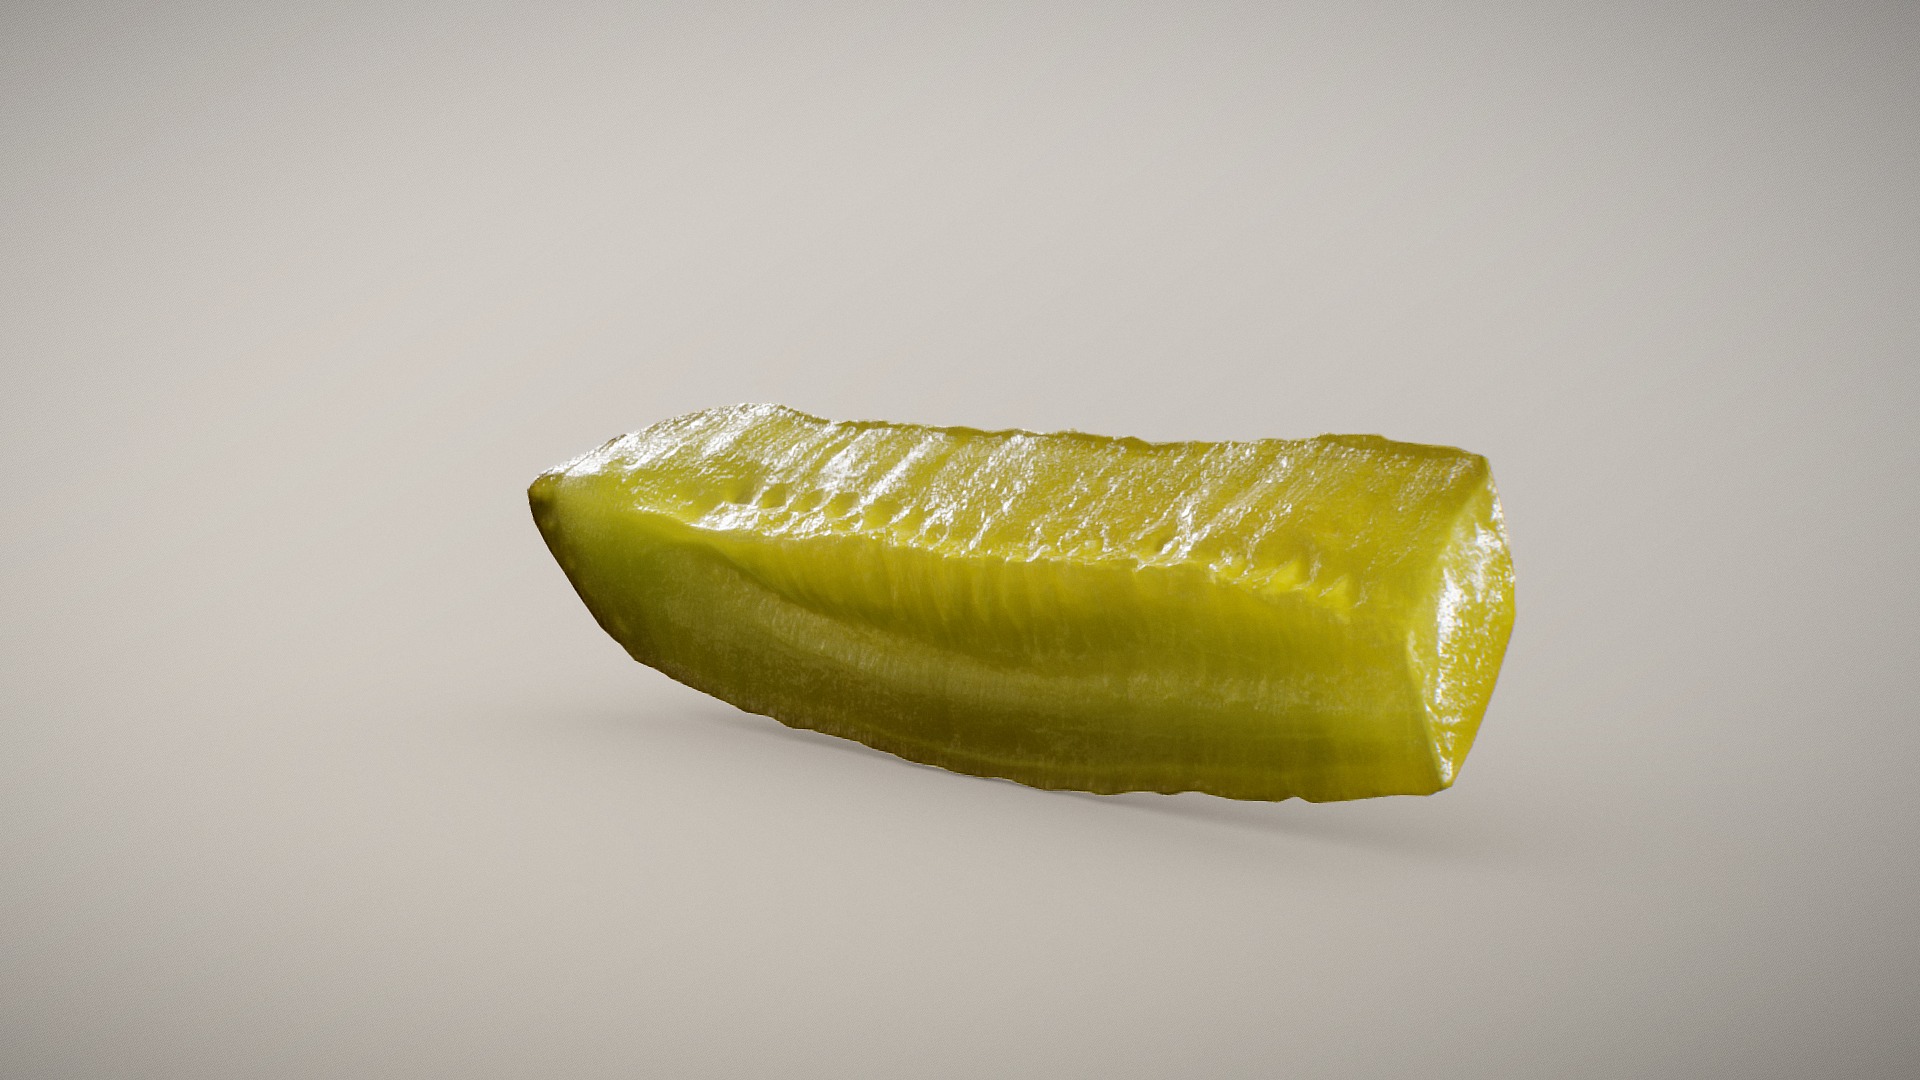 3D model Crunchy Pickle - This is a 3D model of the Crunchy Pickle. The 3D model is about a yellow pickle on a white surface.